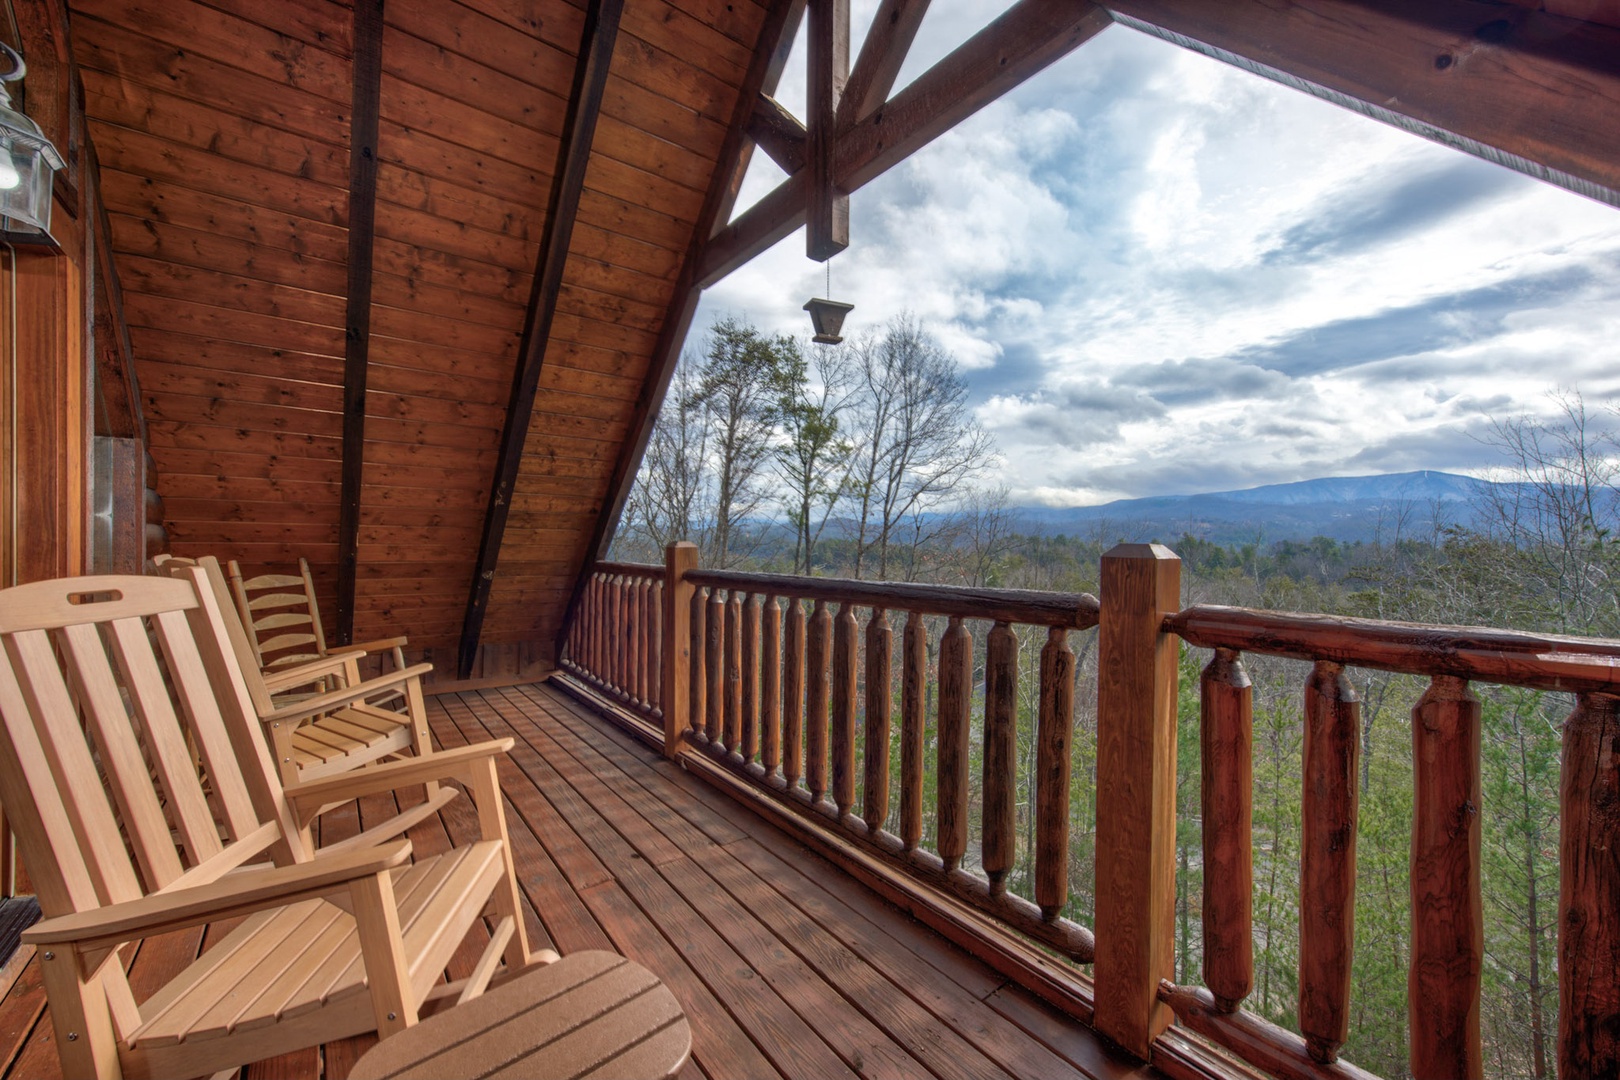 Lounge the day away with treehouse-like views on the upper-level balcony